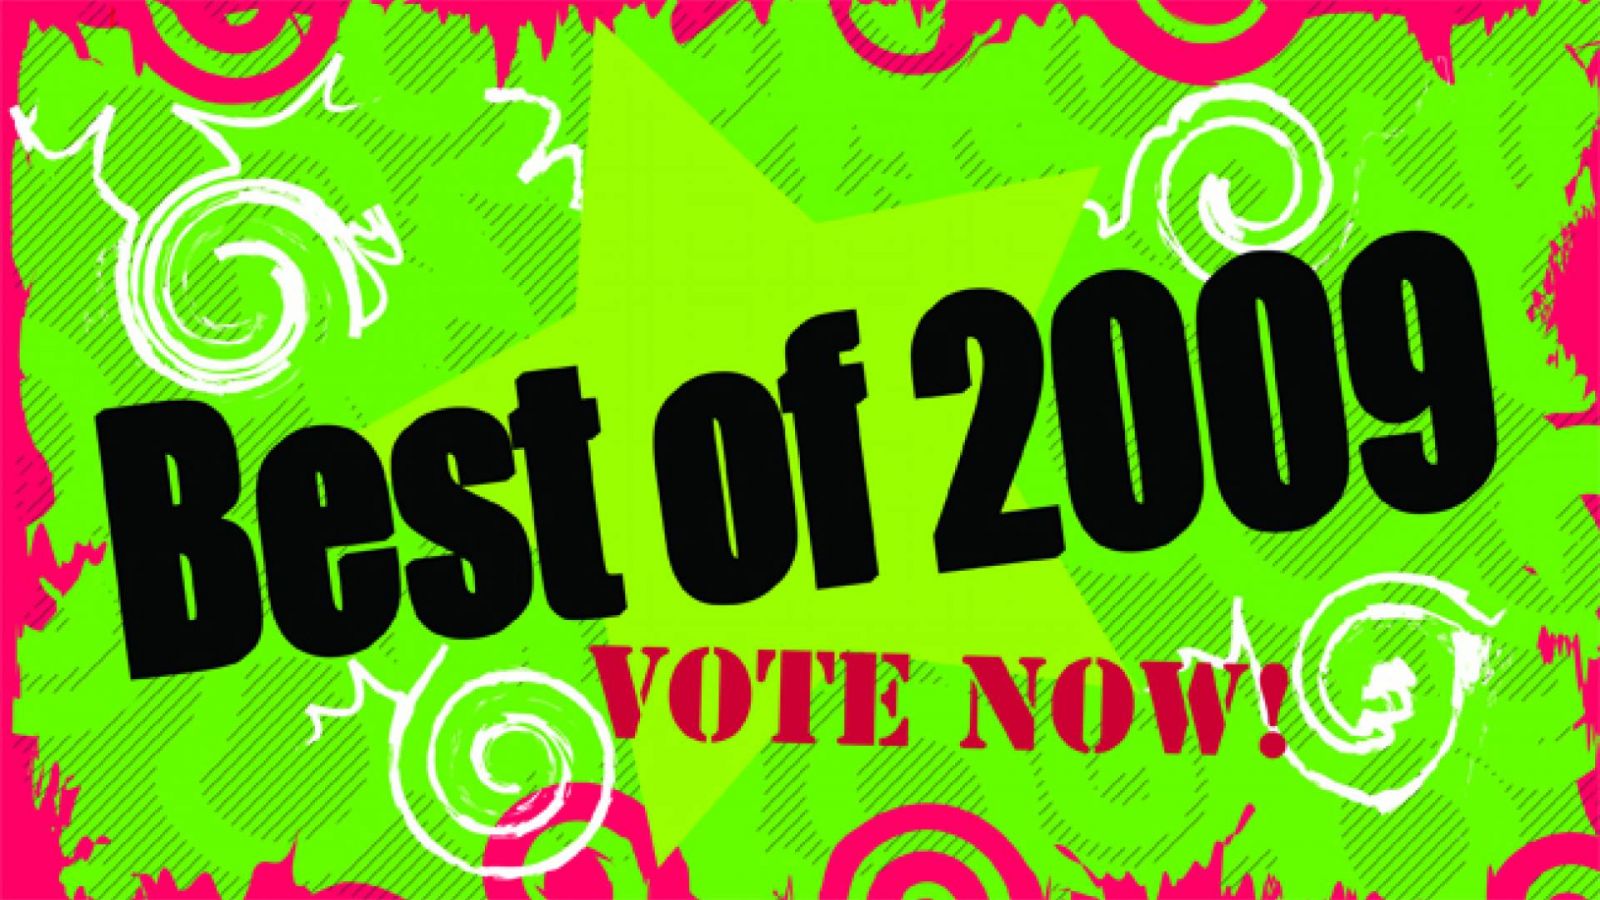 Vote for the Best of 2009 © JaME - Kay